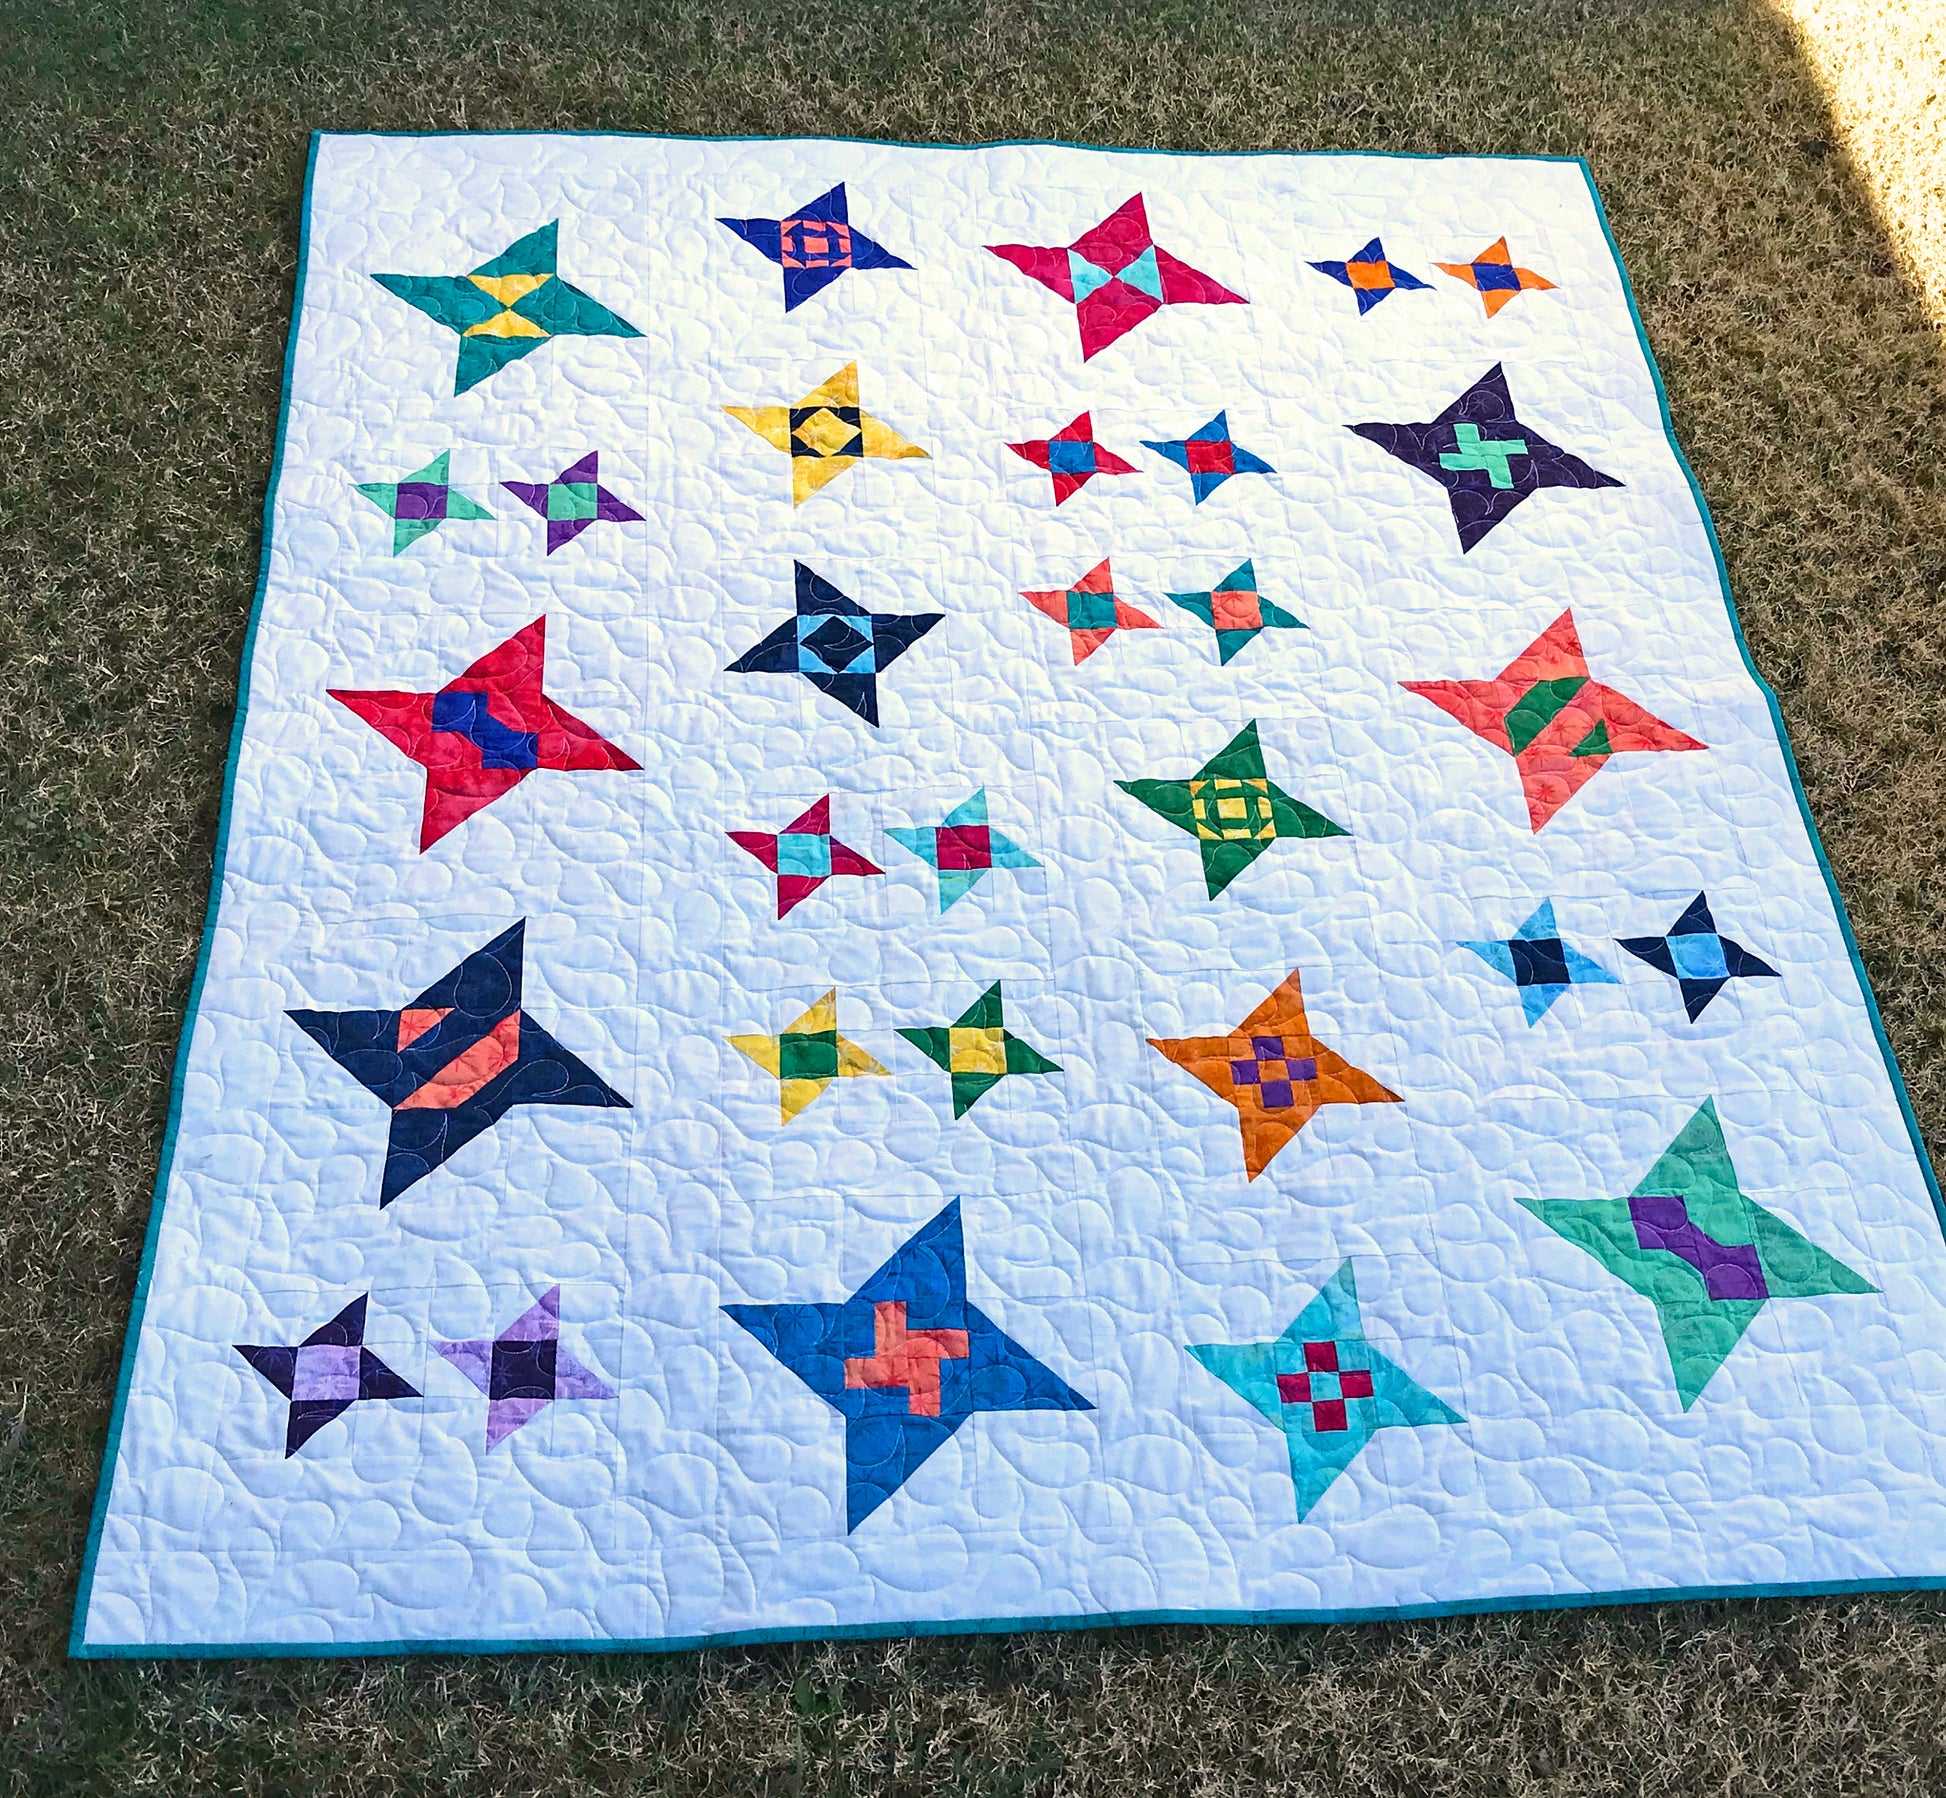 Star Gazing modern star sampler quilt pattern displayed on a lawn. Stars are in various sizes with various fabrics on a white background.